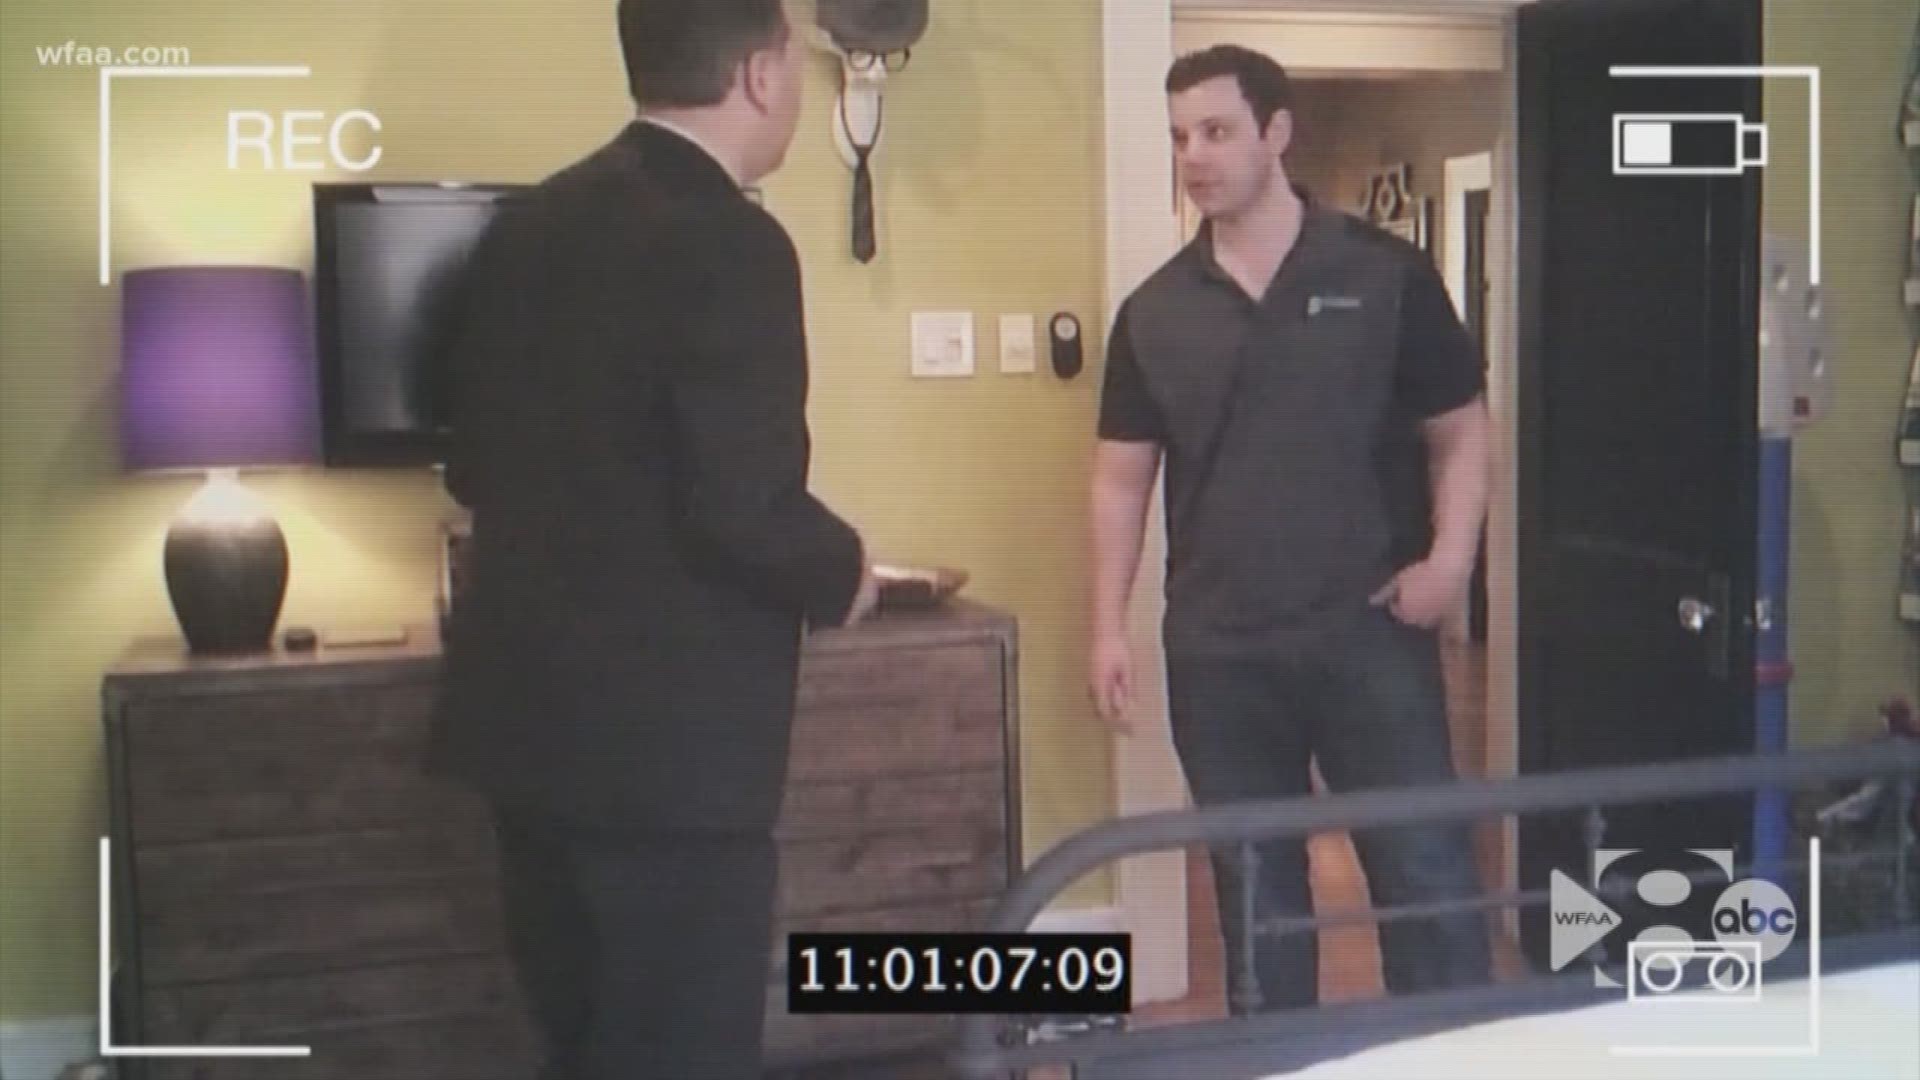 “When I was getting in bed I noticed the two little boxes plugged into the outlets... and found out they were cameras," Airbnb customer Max Vest said.